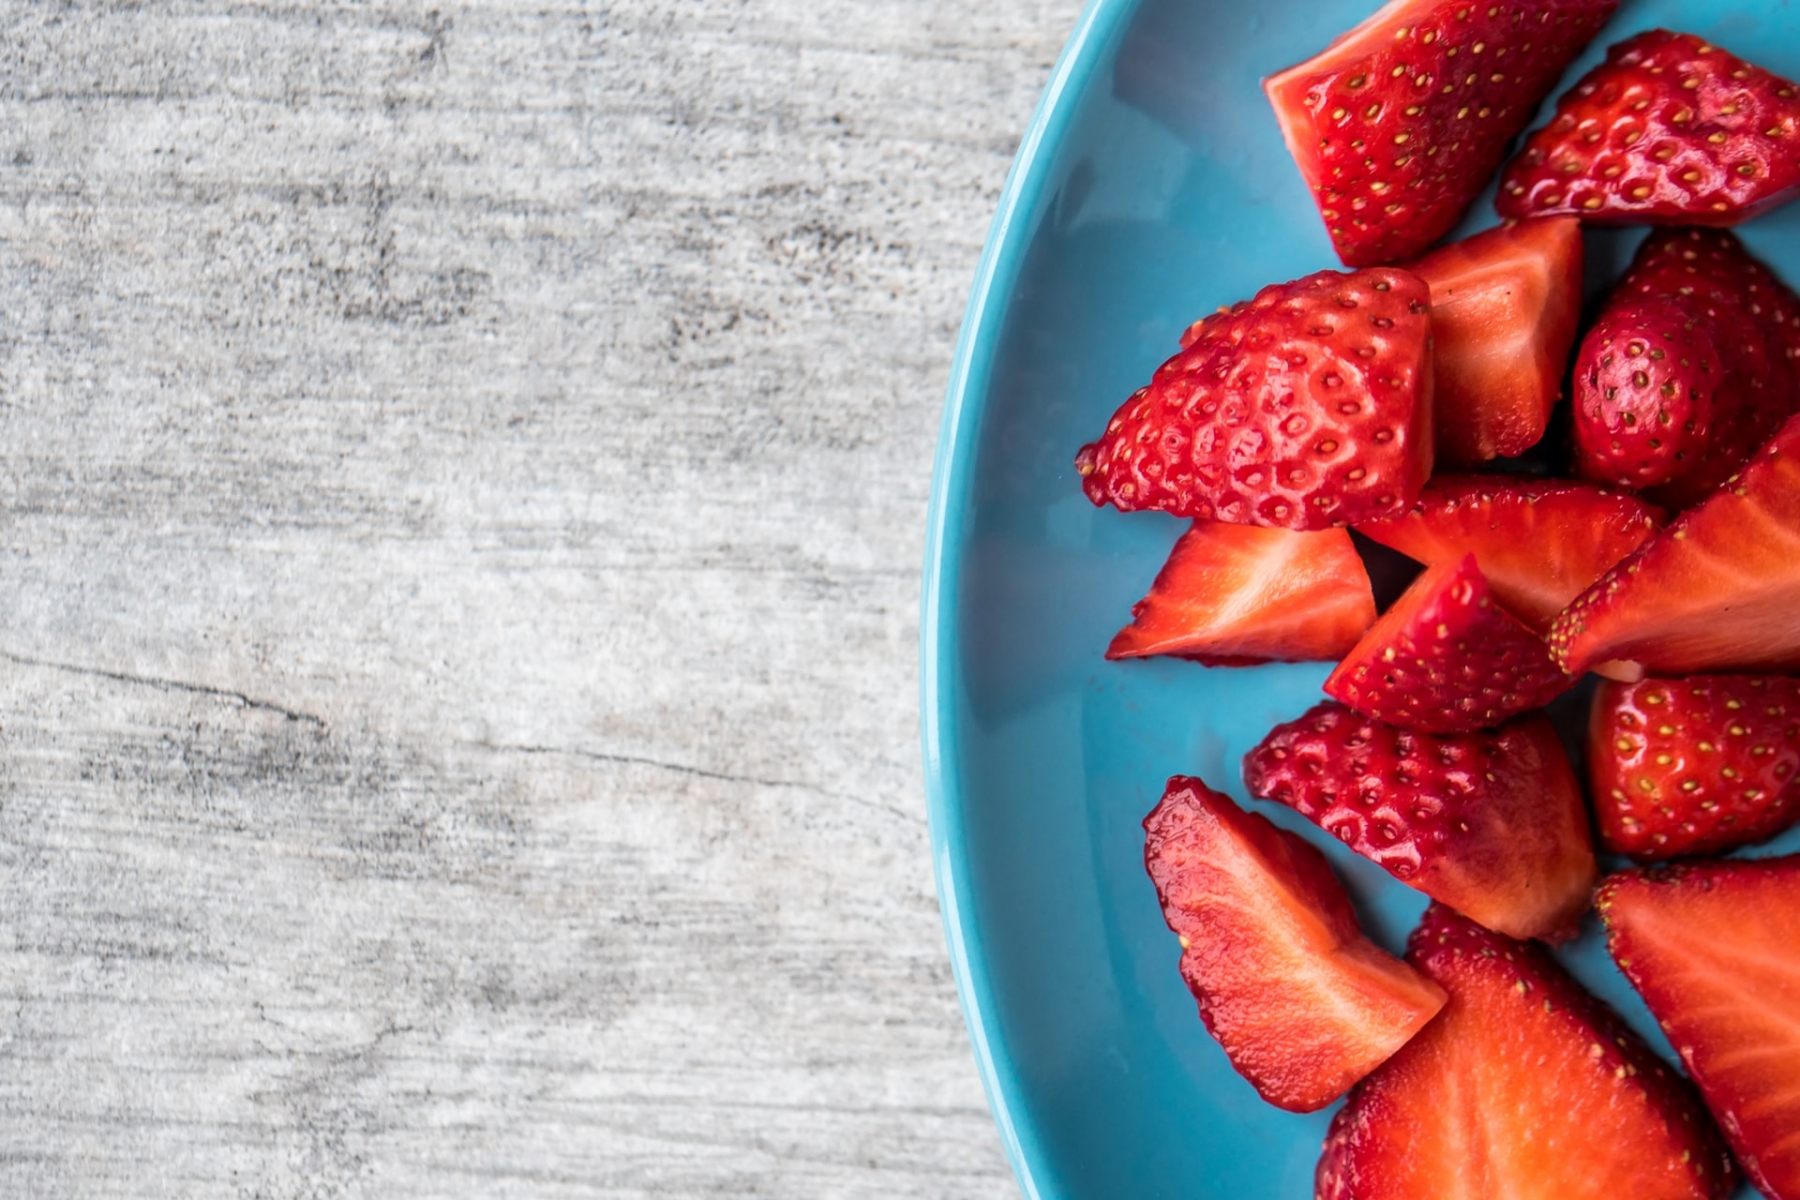 Strawberries are great for you health.